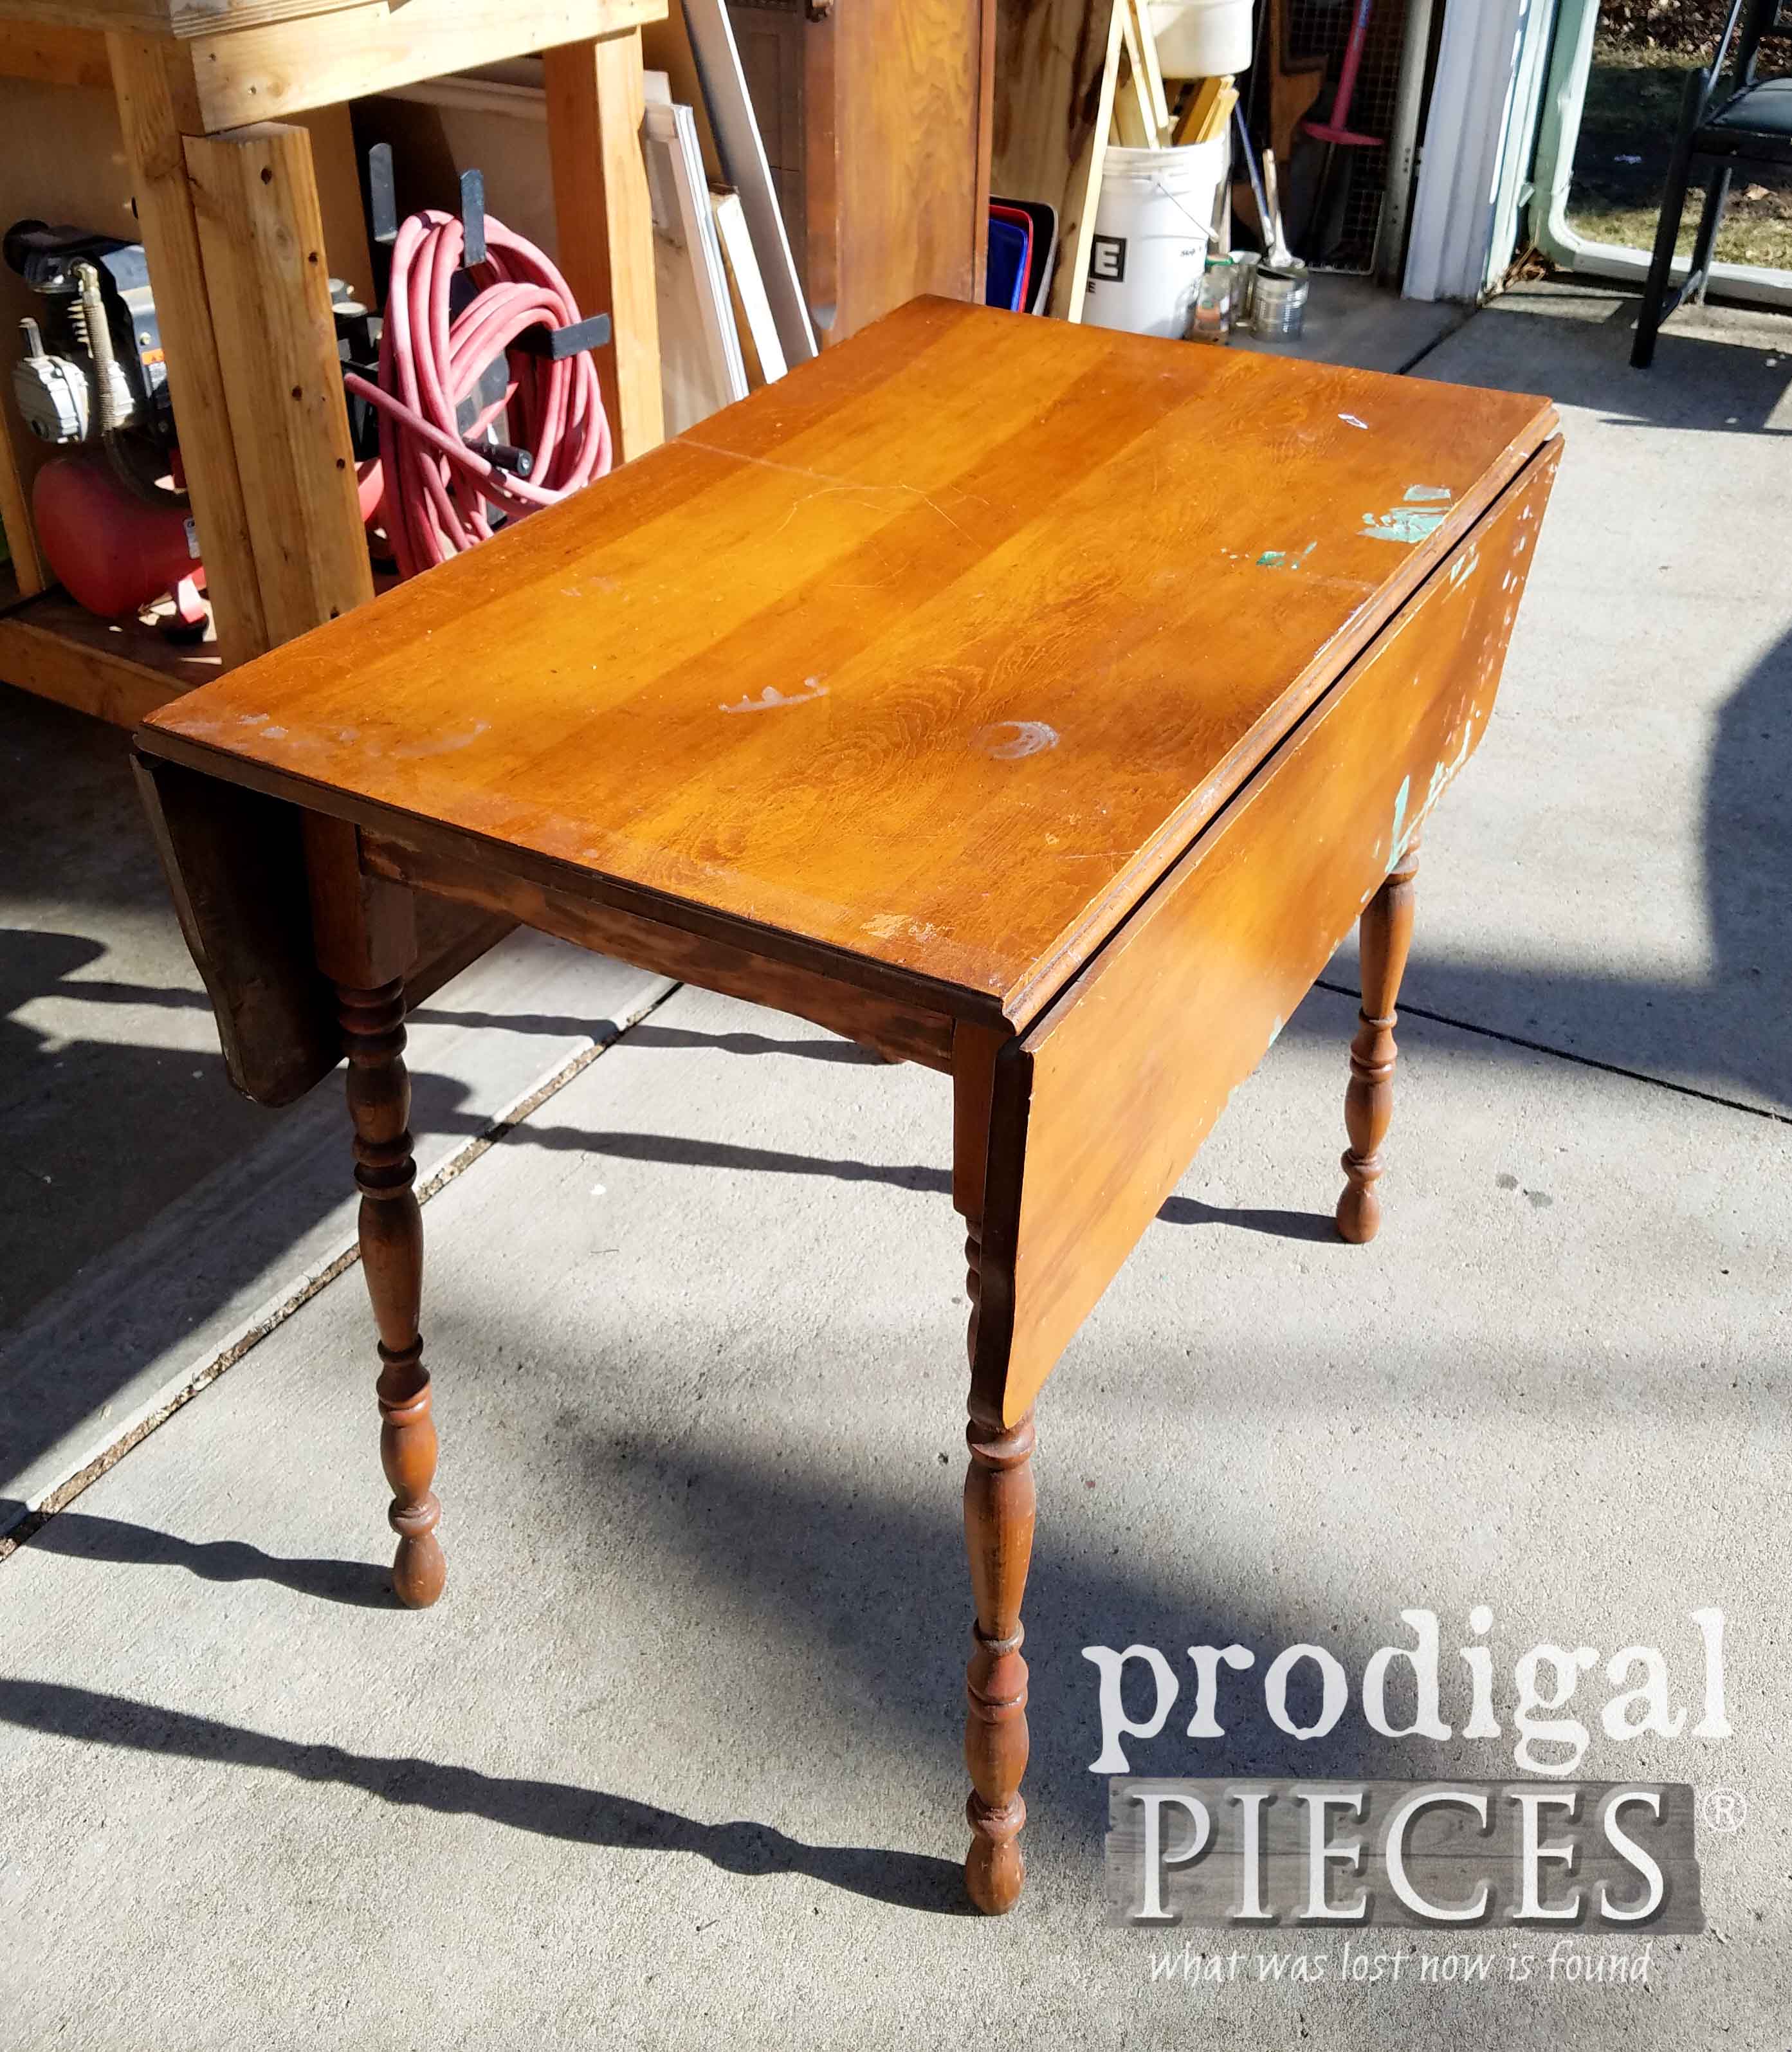 Vintage Pine Drop-Leaf Table Needing Updated by Prodigal Pieces | prodigalpieces.com